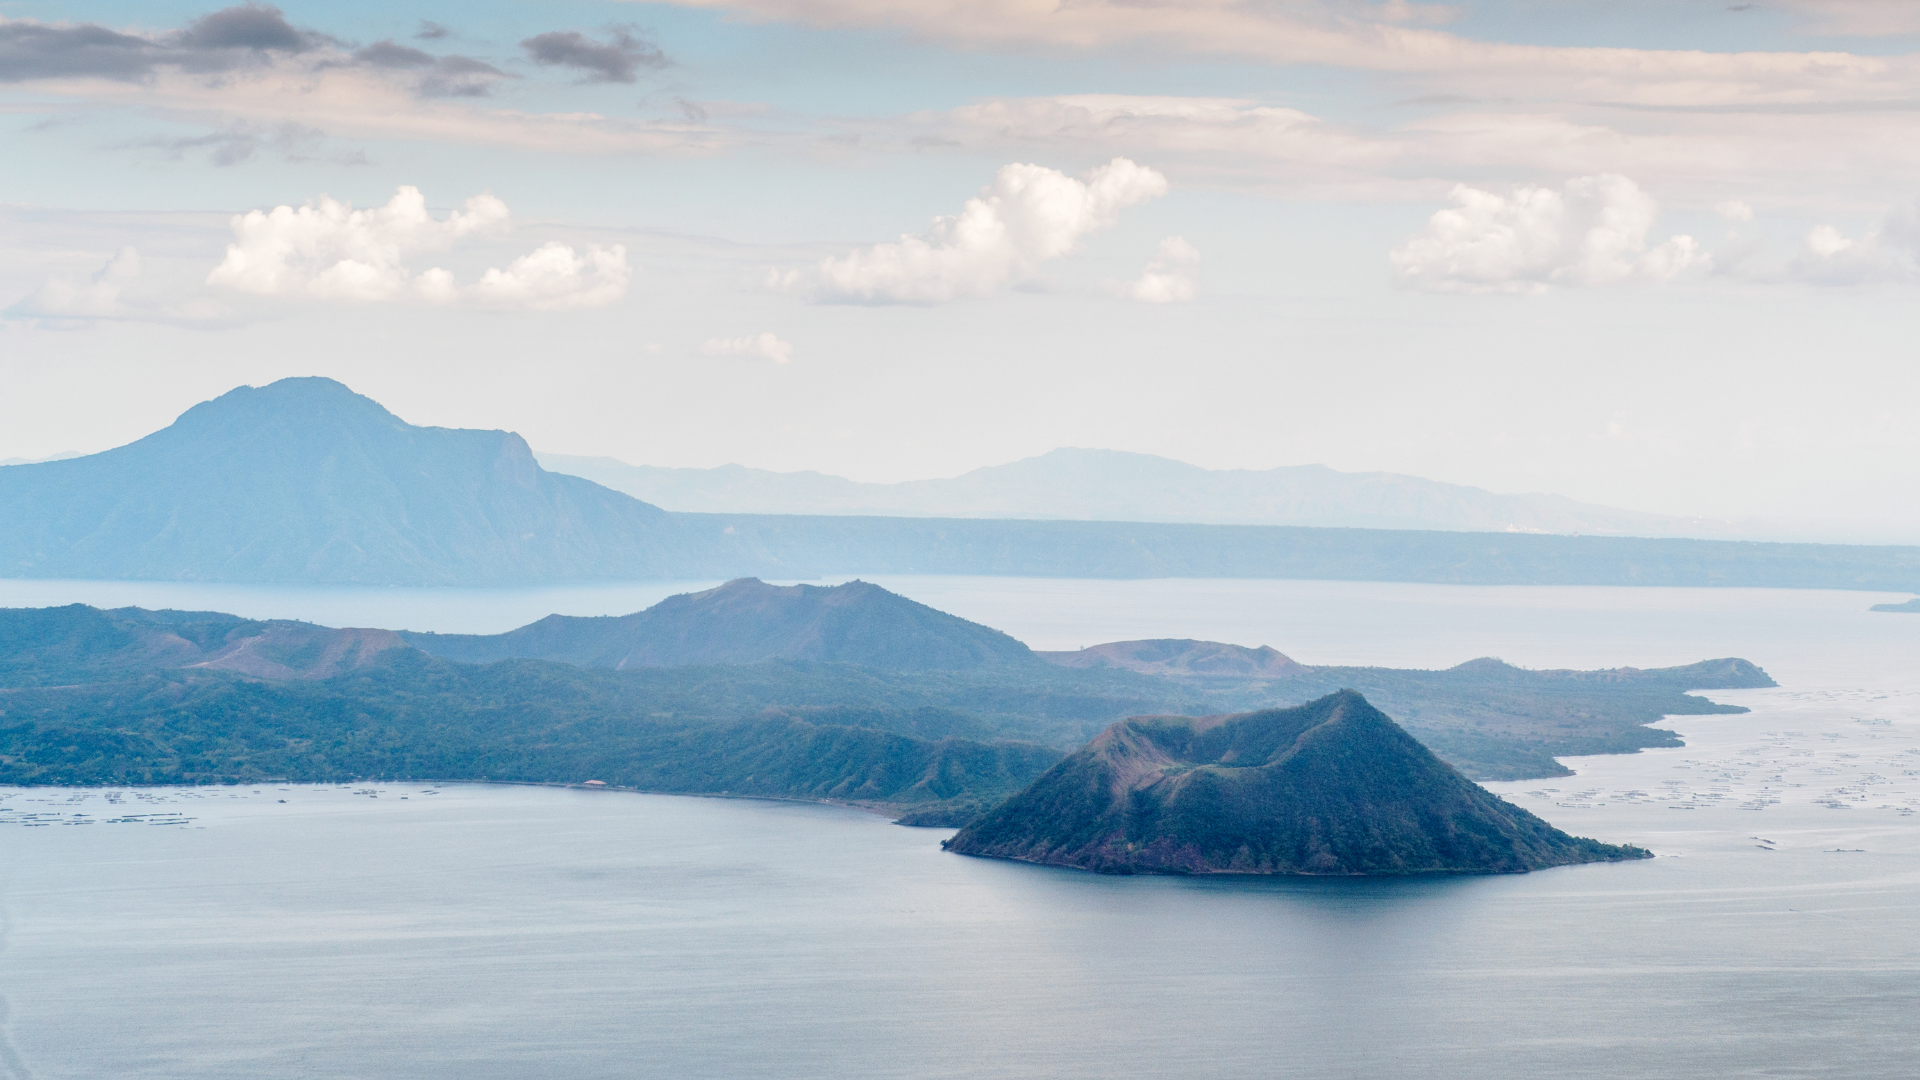 Taal Volcano landscape view